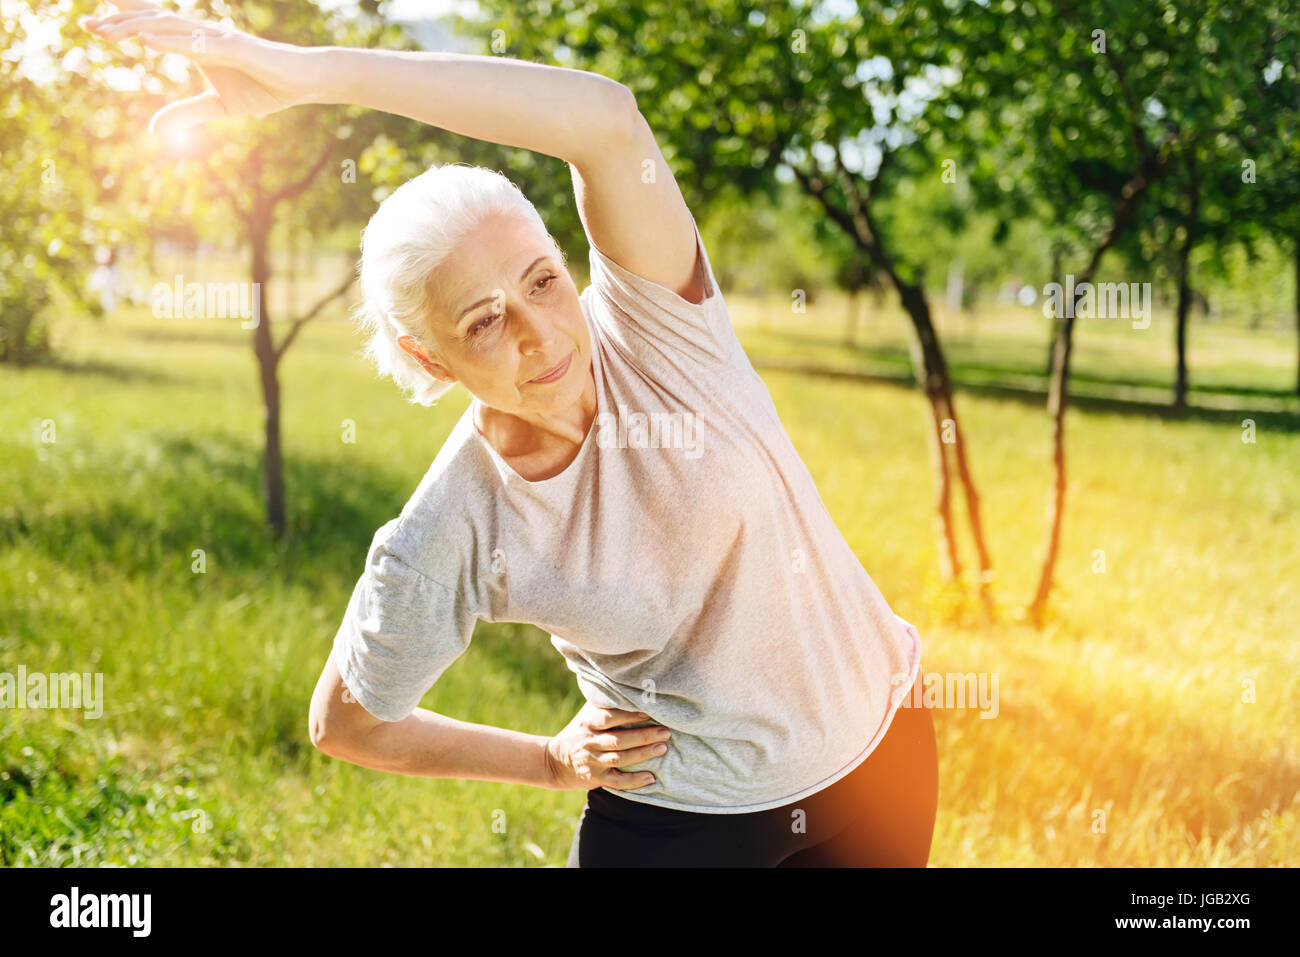 Pleasant aged woman doing sport exercises Stock Photo